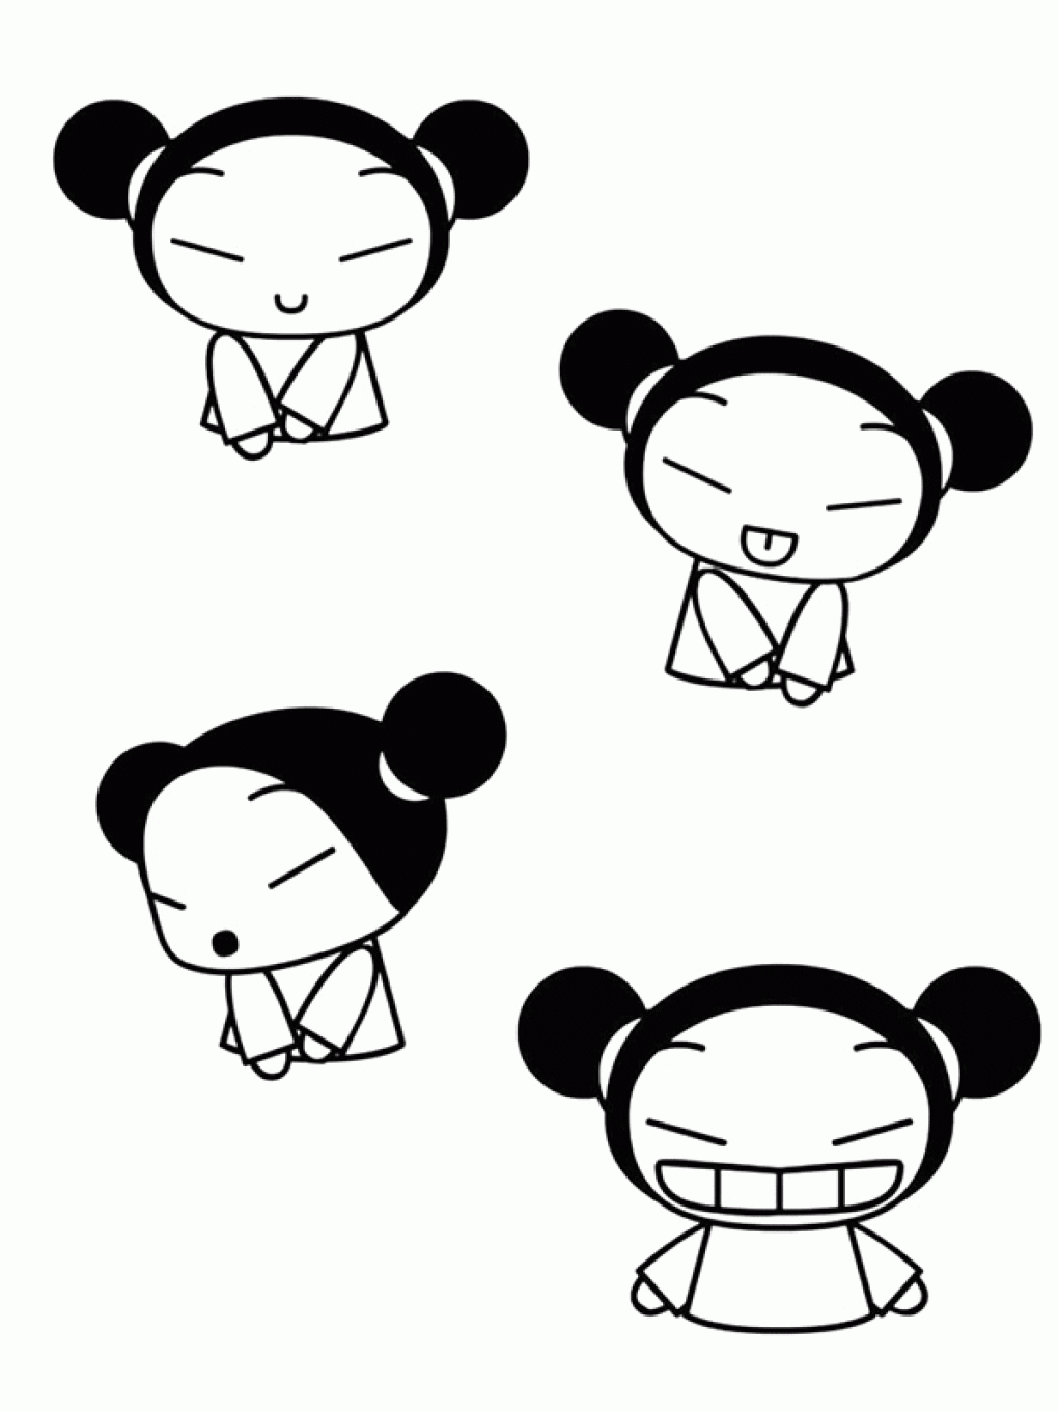 Pucca th for kids